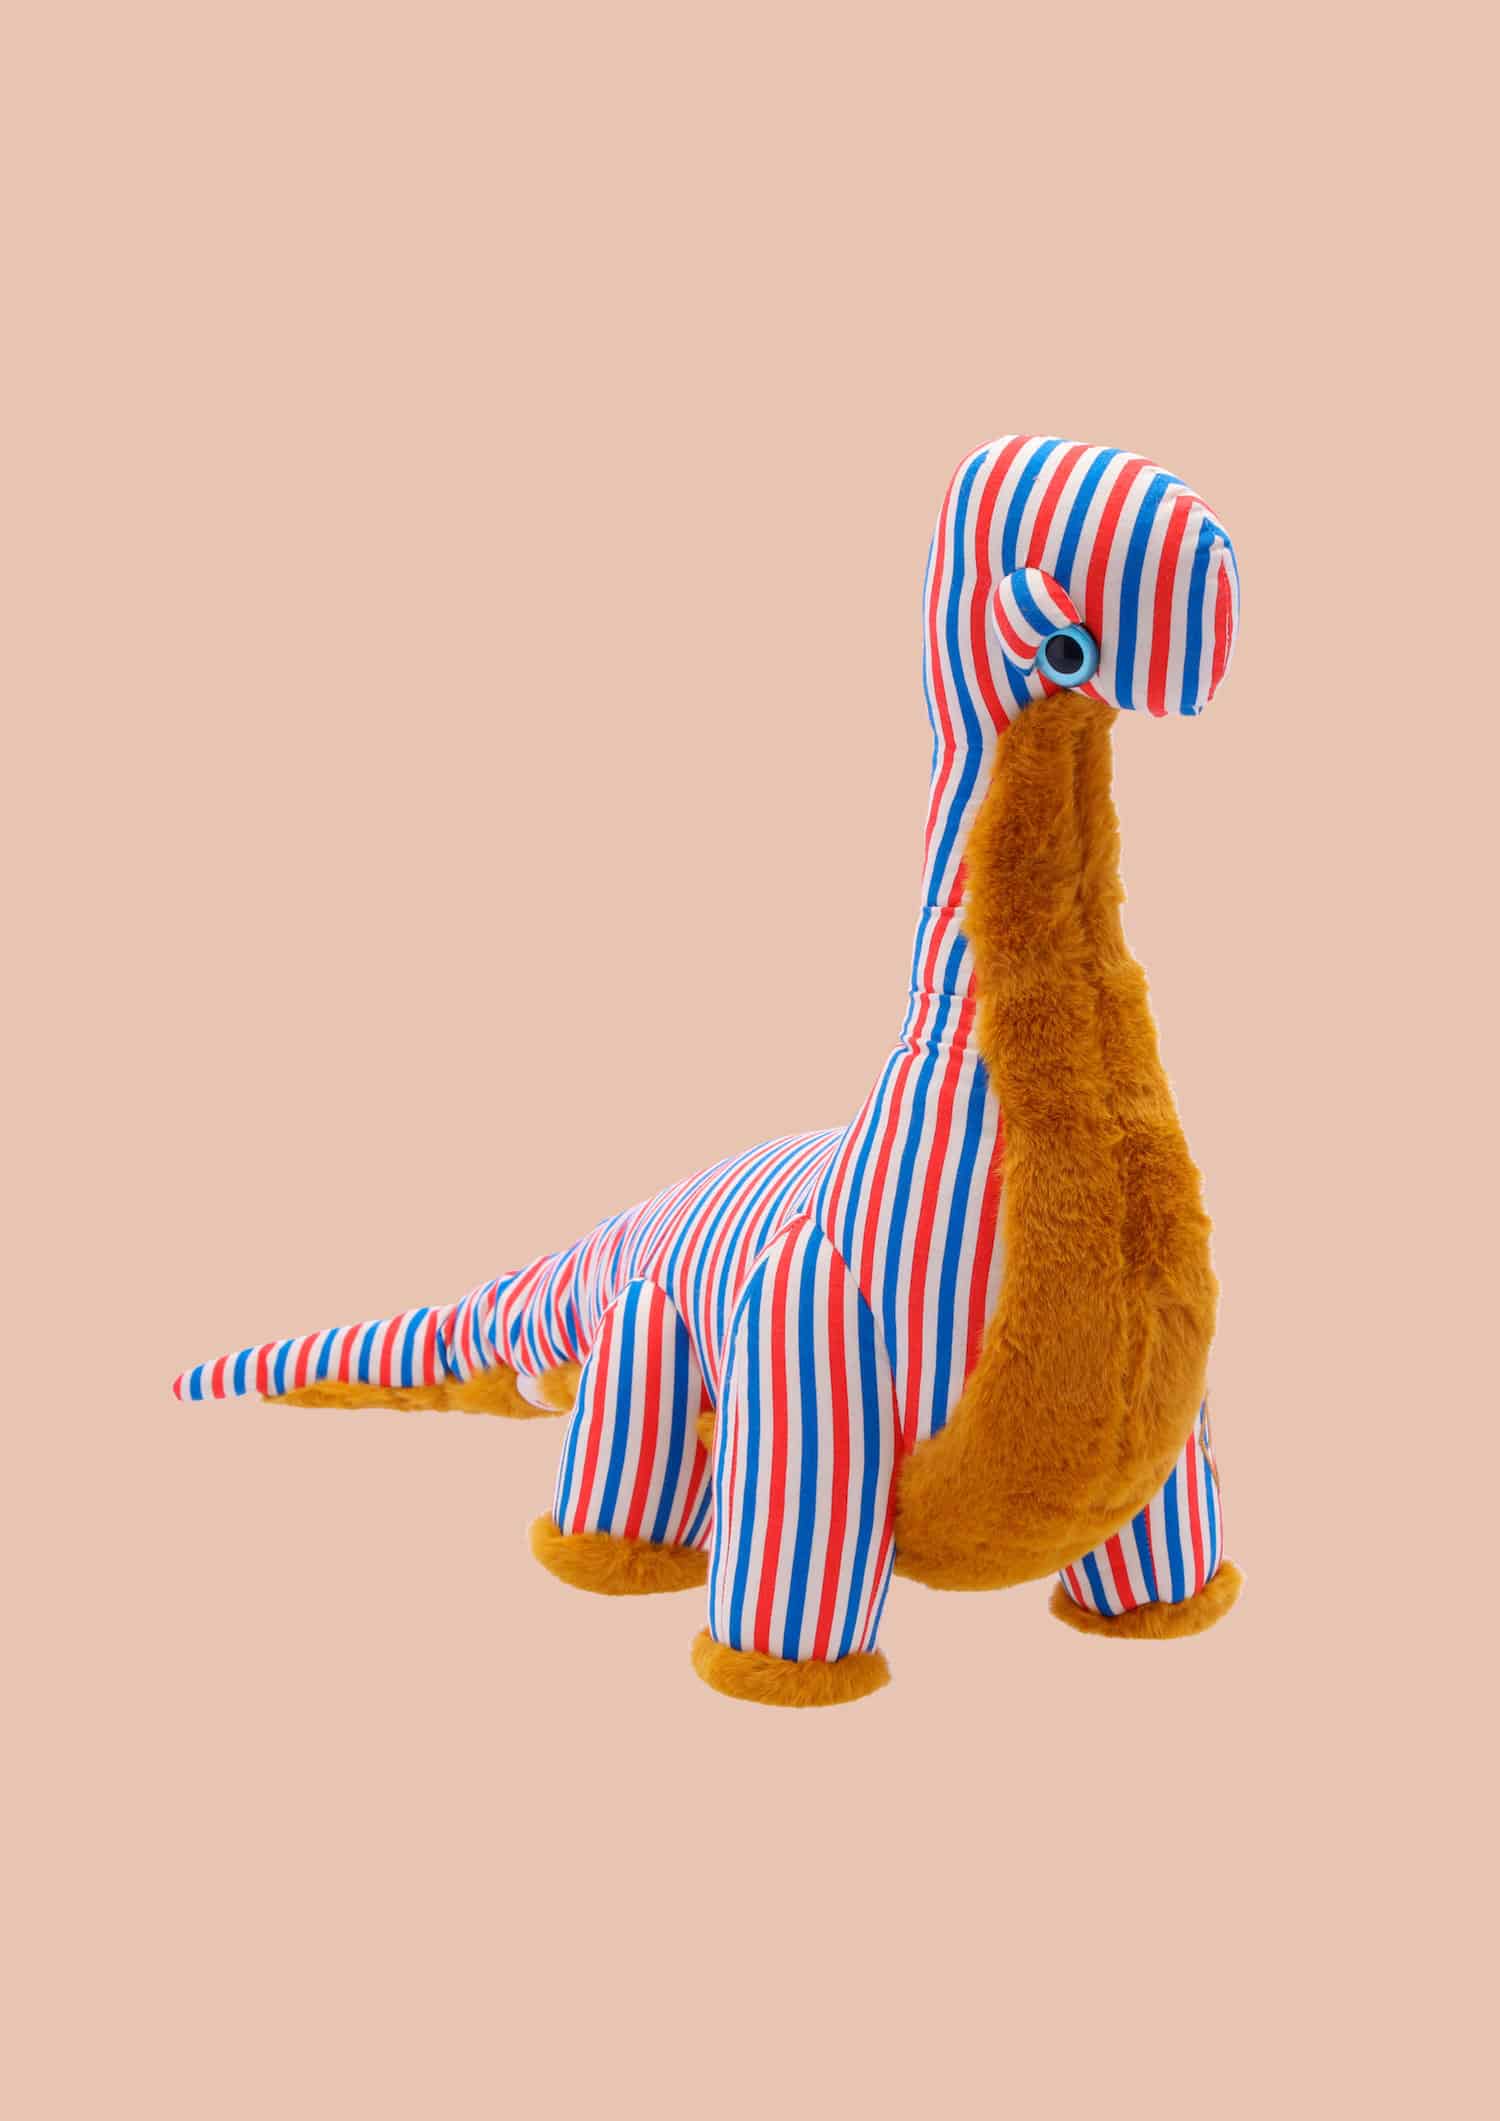 Circus Diplo, the Animals Observatory x BigStuffed collaboration 